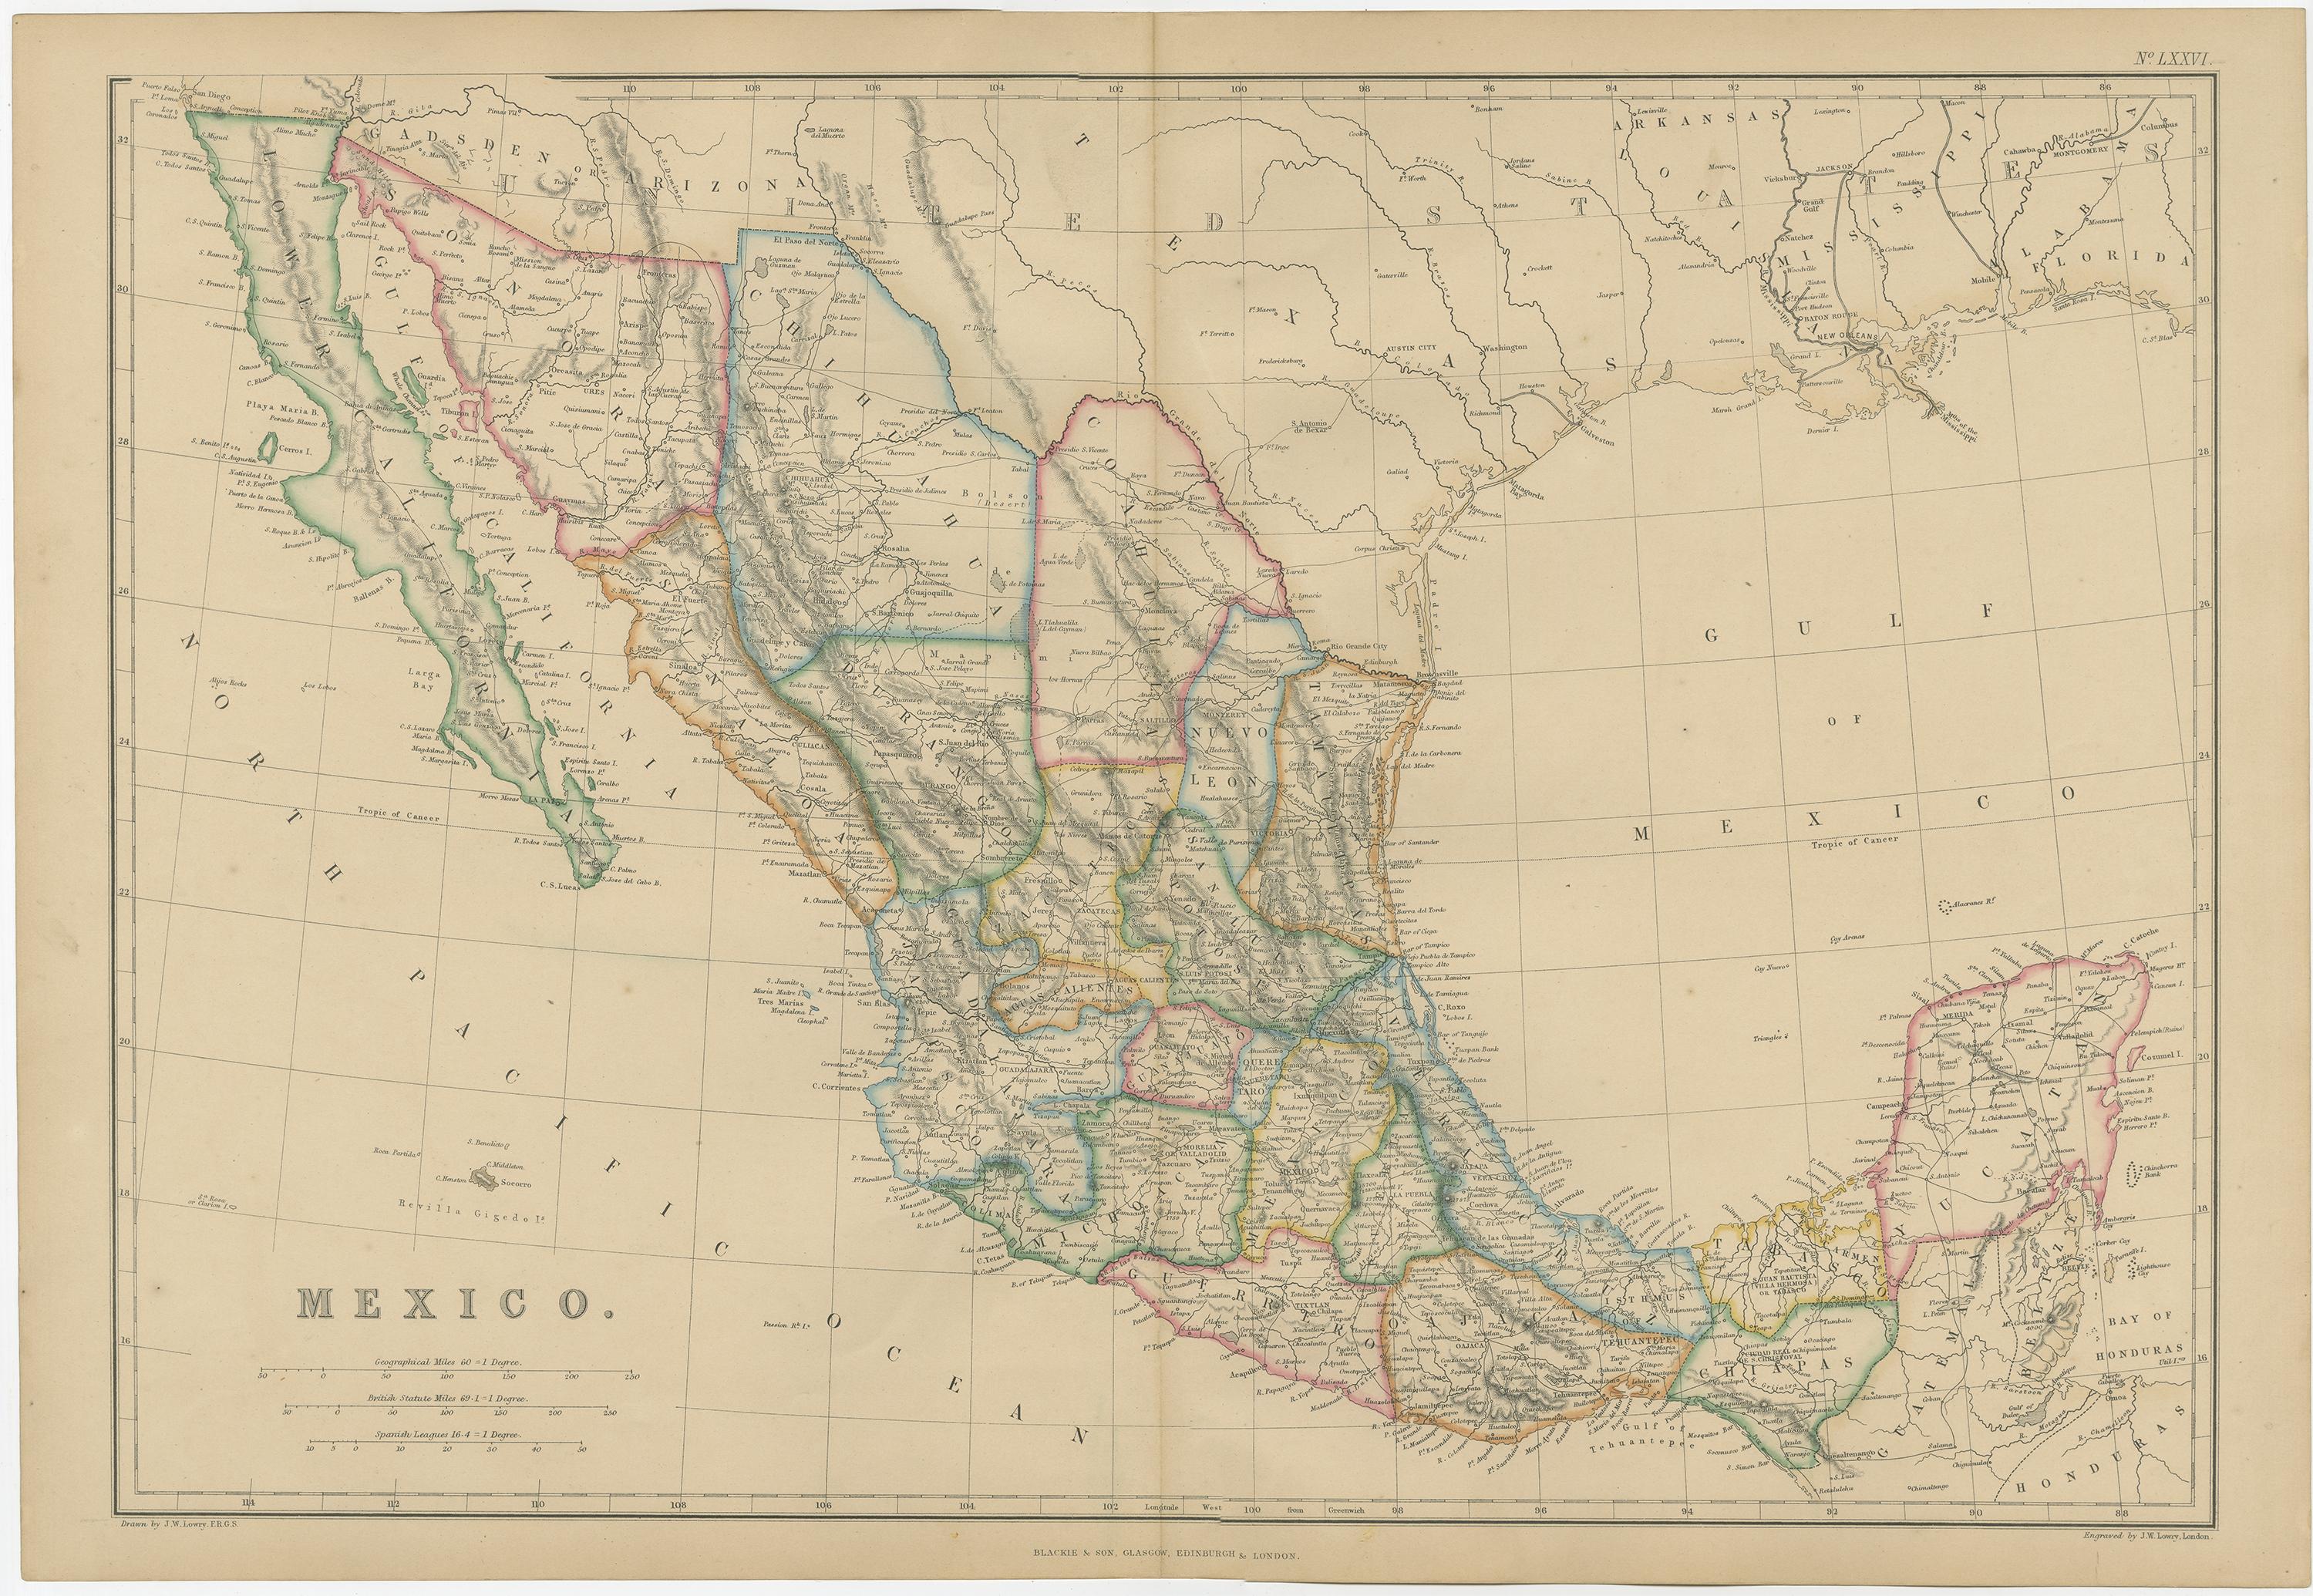 Antique map titled 'Mexico'. Original antique map of Mexico. This map originates from ‘The Imperial Atlas of Modern Geography’. Published by W. G. Blackie, 1859.